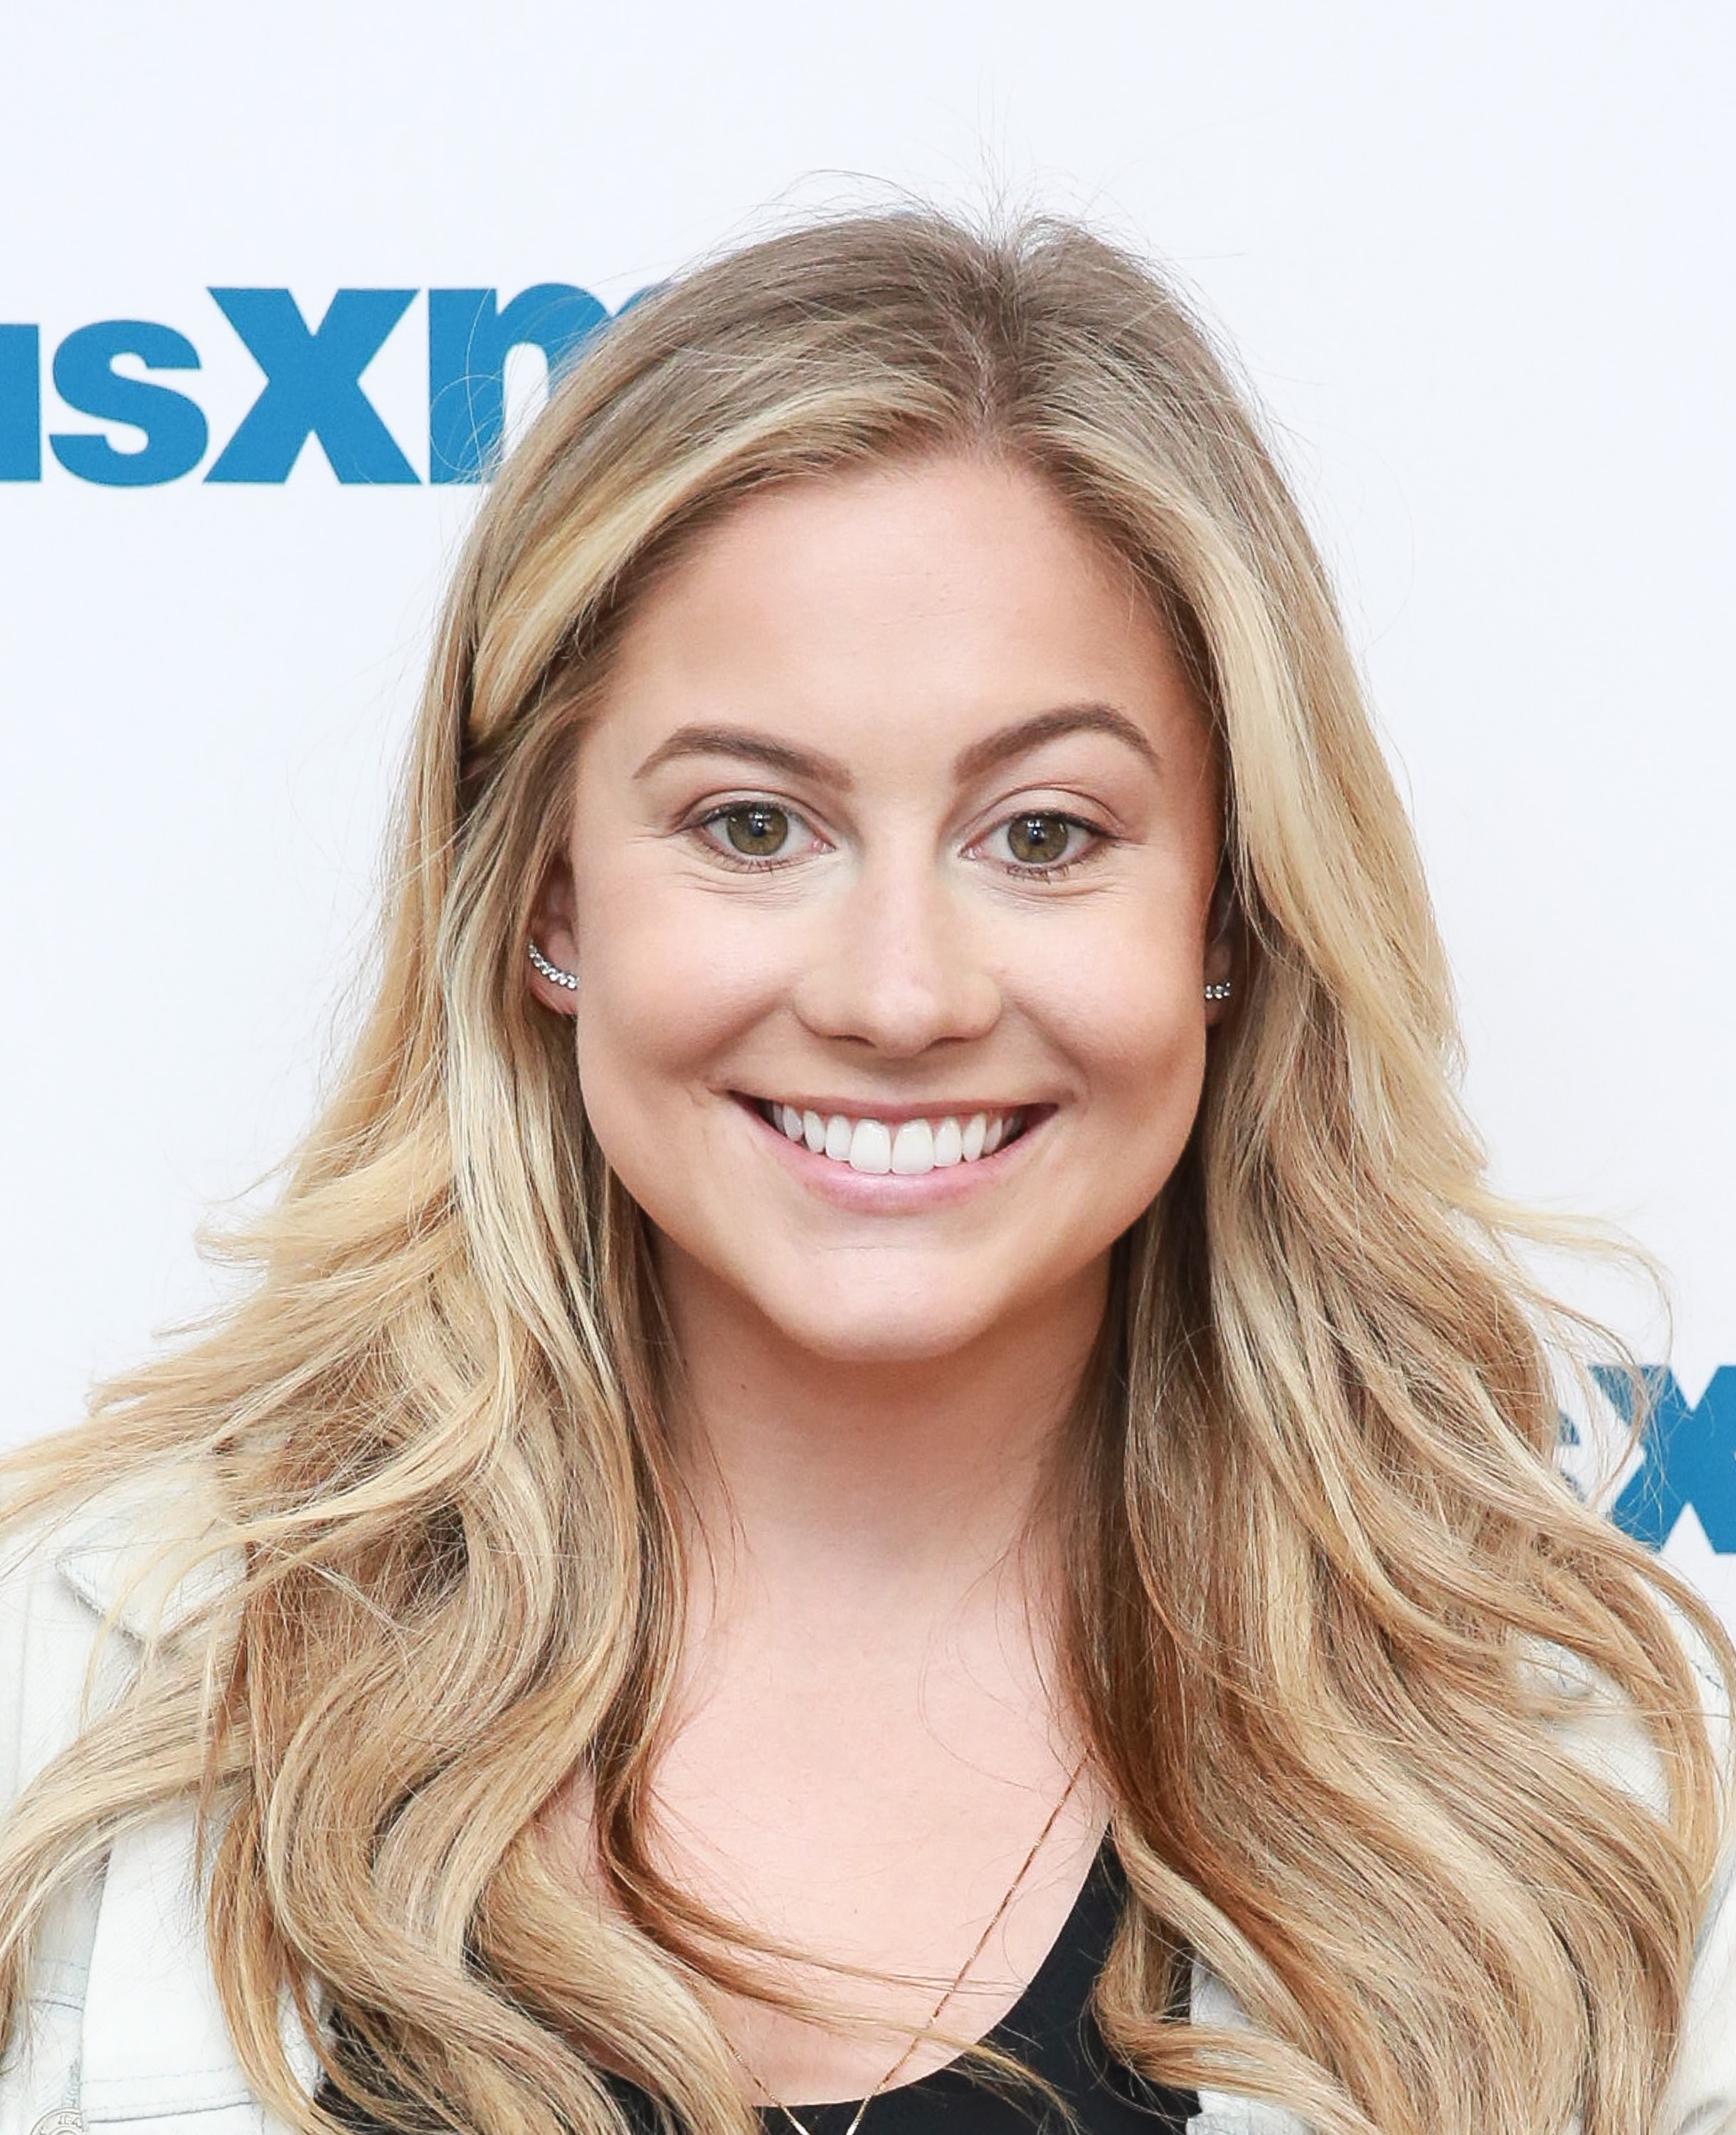 Former ‘DWTS’ Champ Shawn Johnson Shares Past Struggle With Eating Disorder: ‘I Went Through This Dark Kind of Spiral’